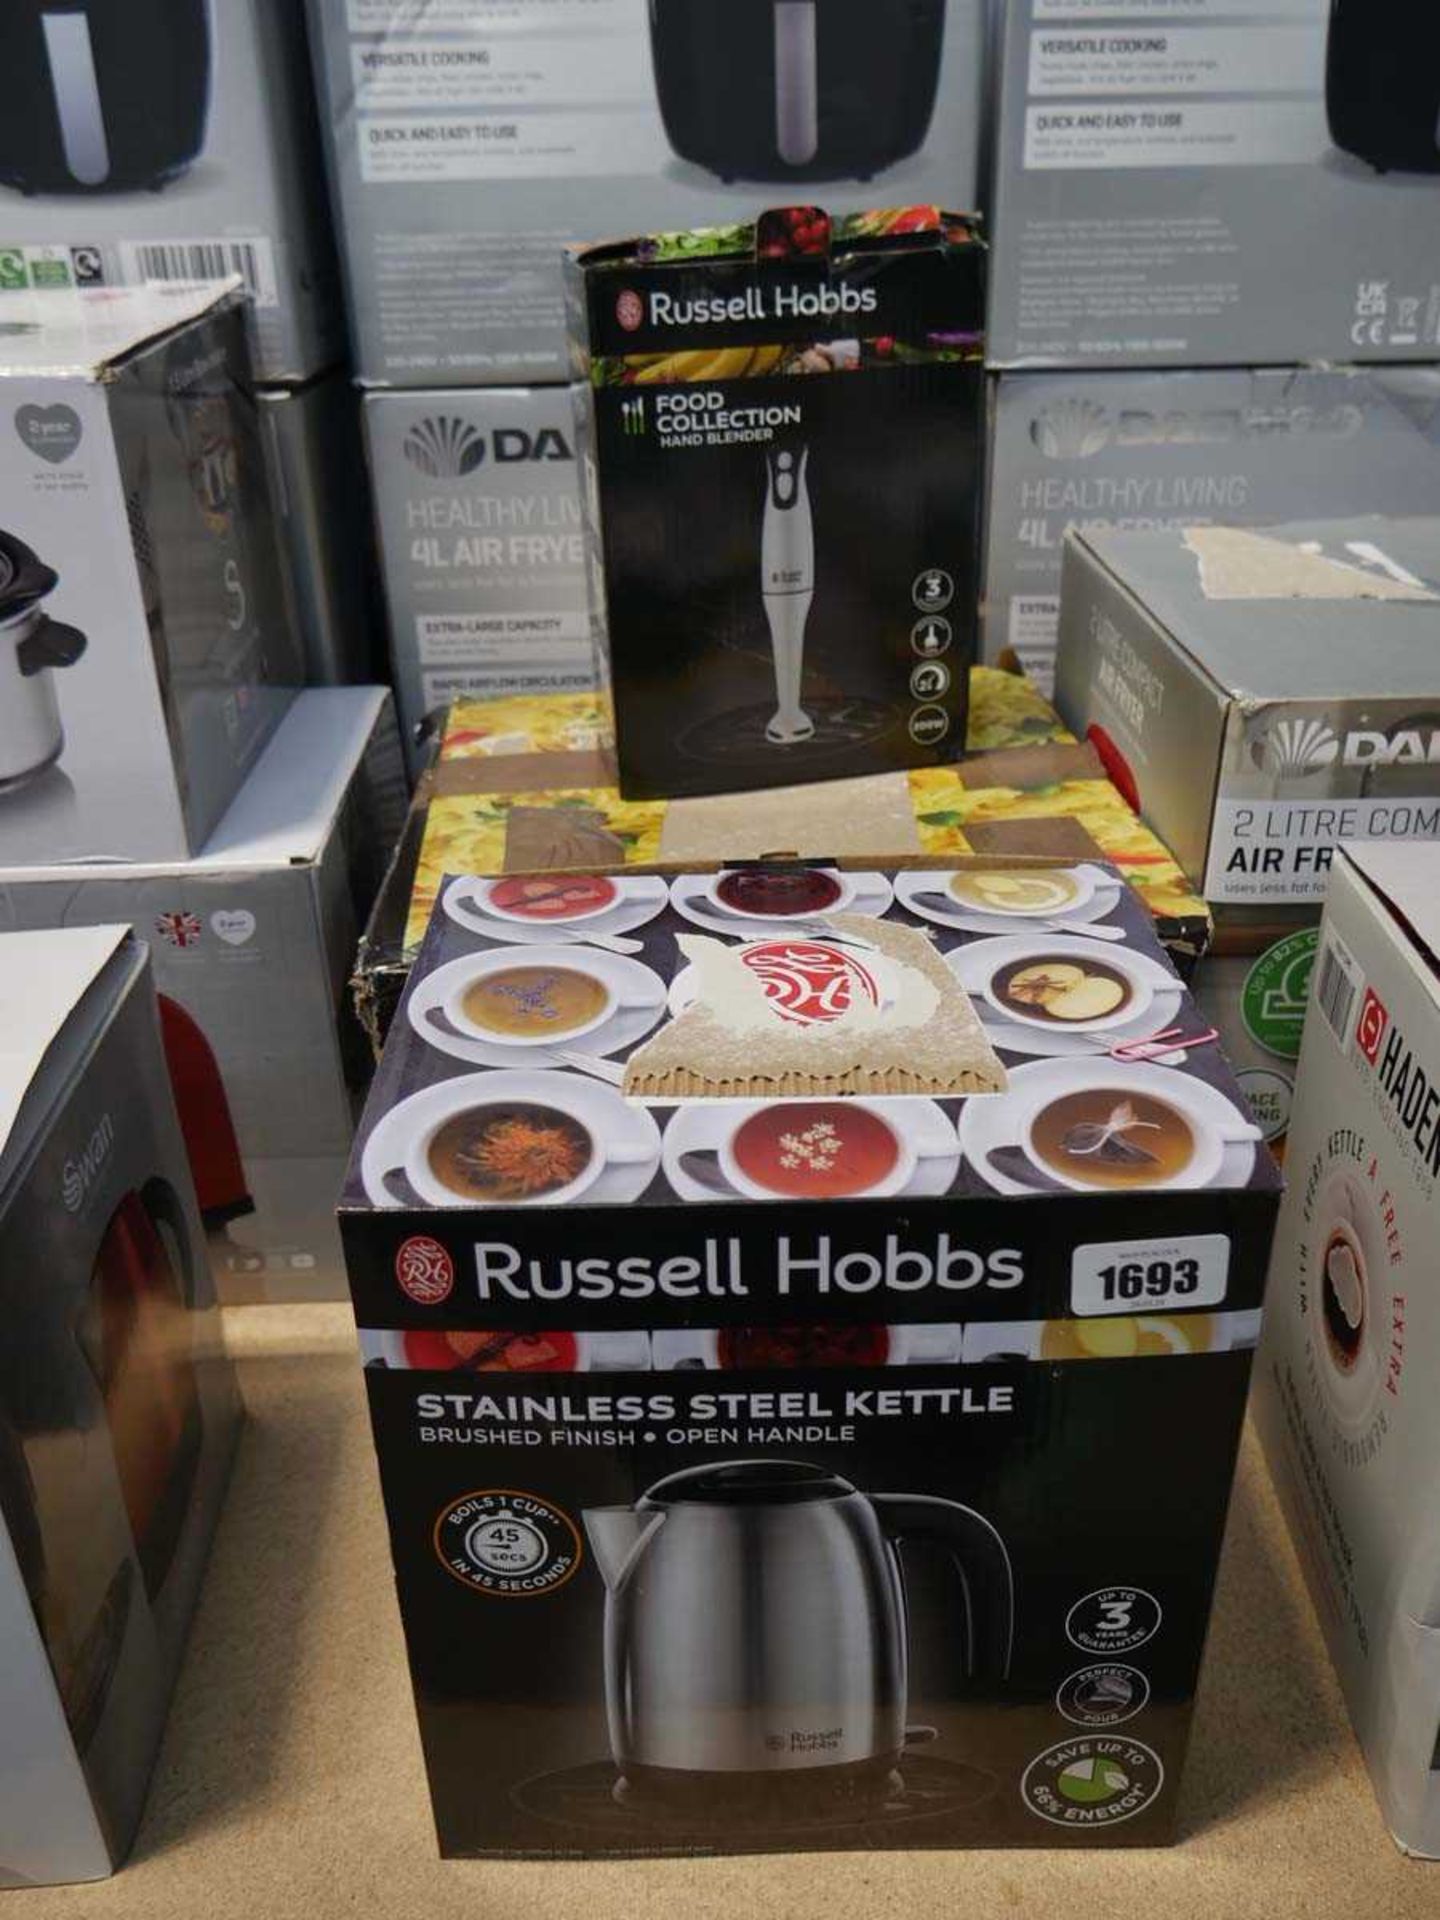 3 Russell Hobbs kitchen items incl. hand blender, large rice cooker and stainless steel kettle